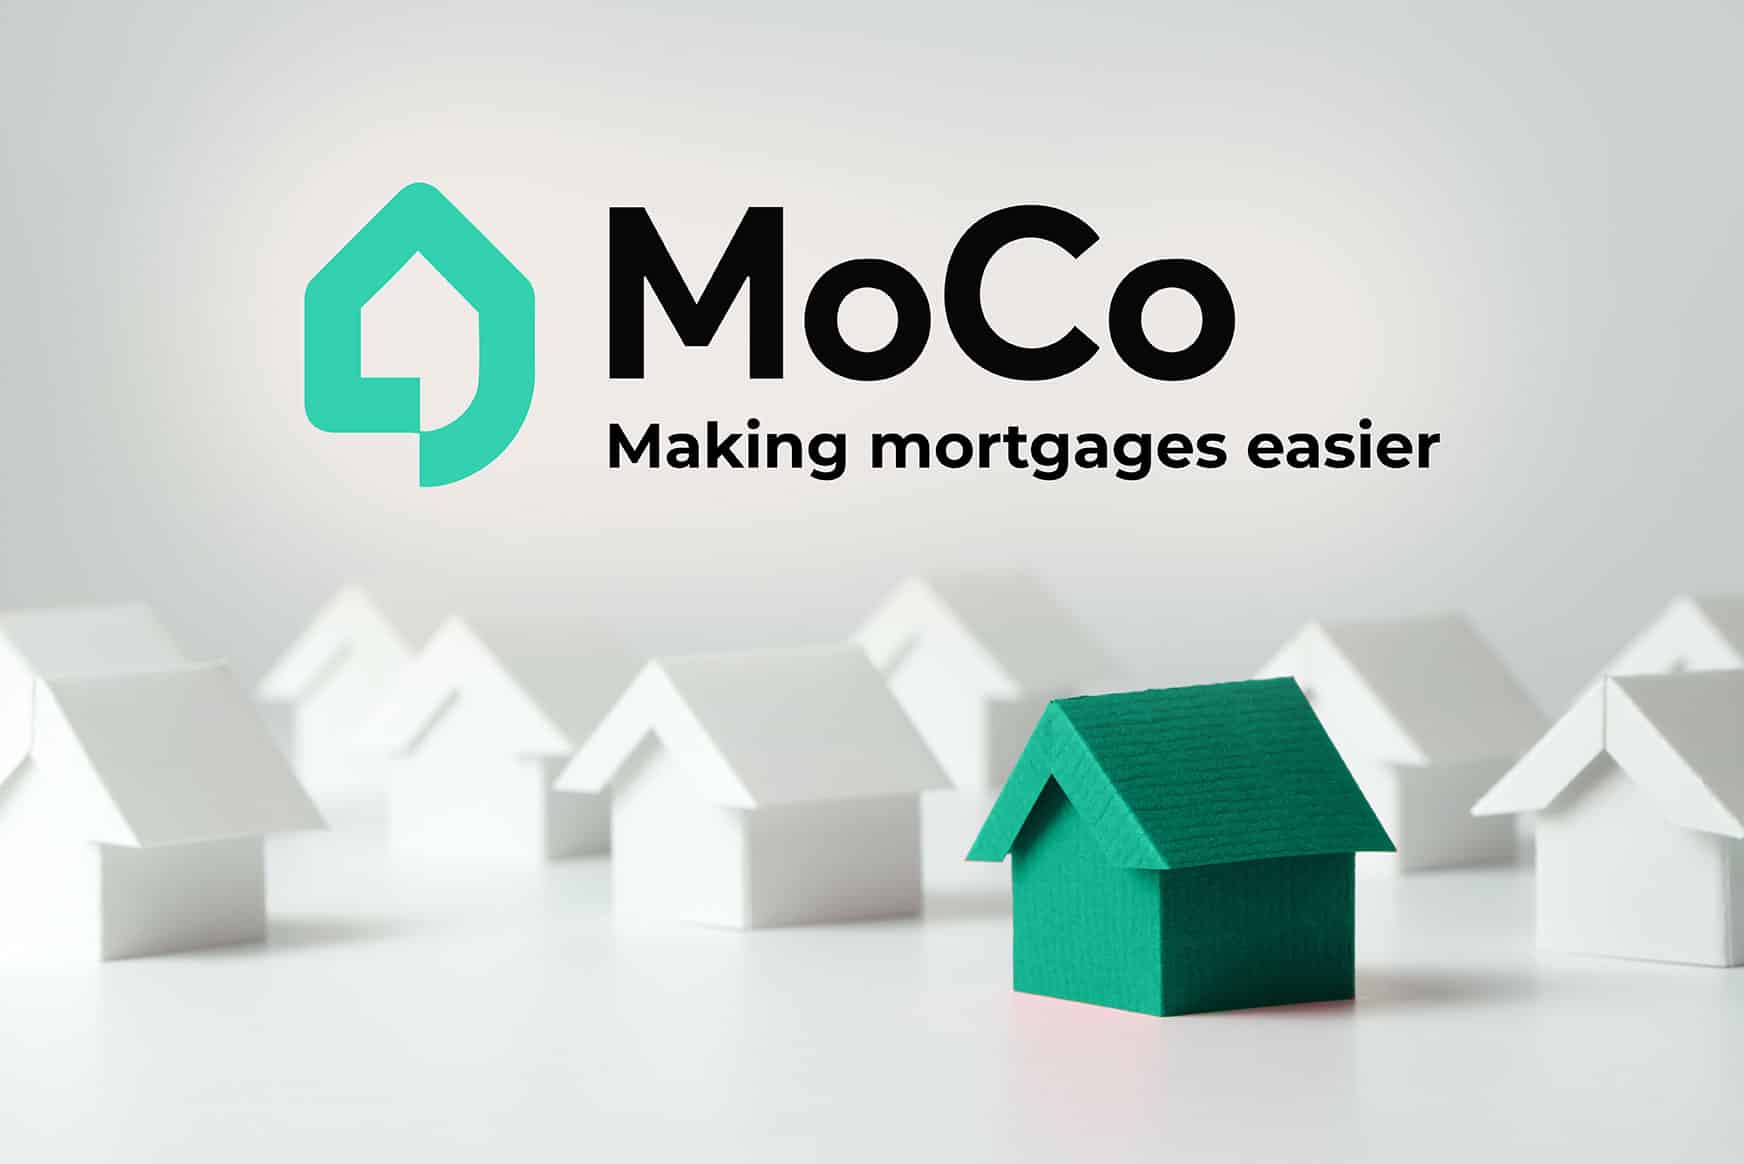 MoCo Mortgages - New lender in Ireland